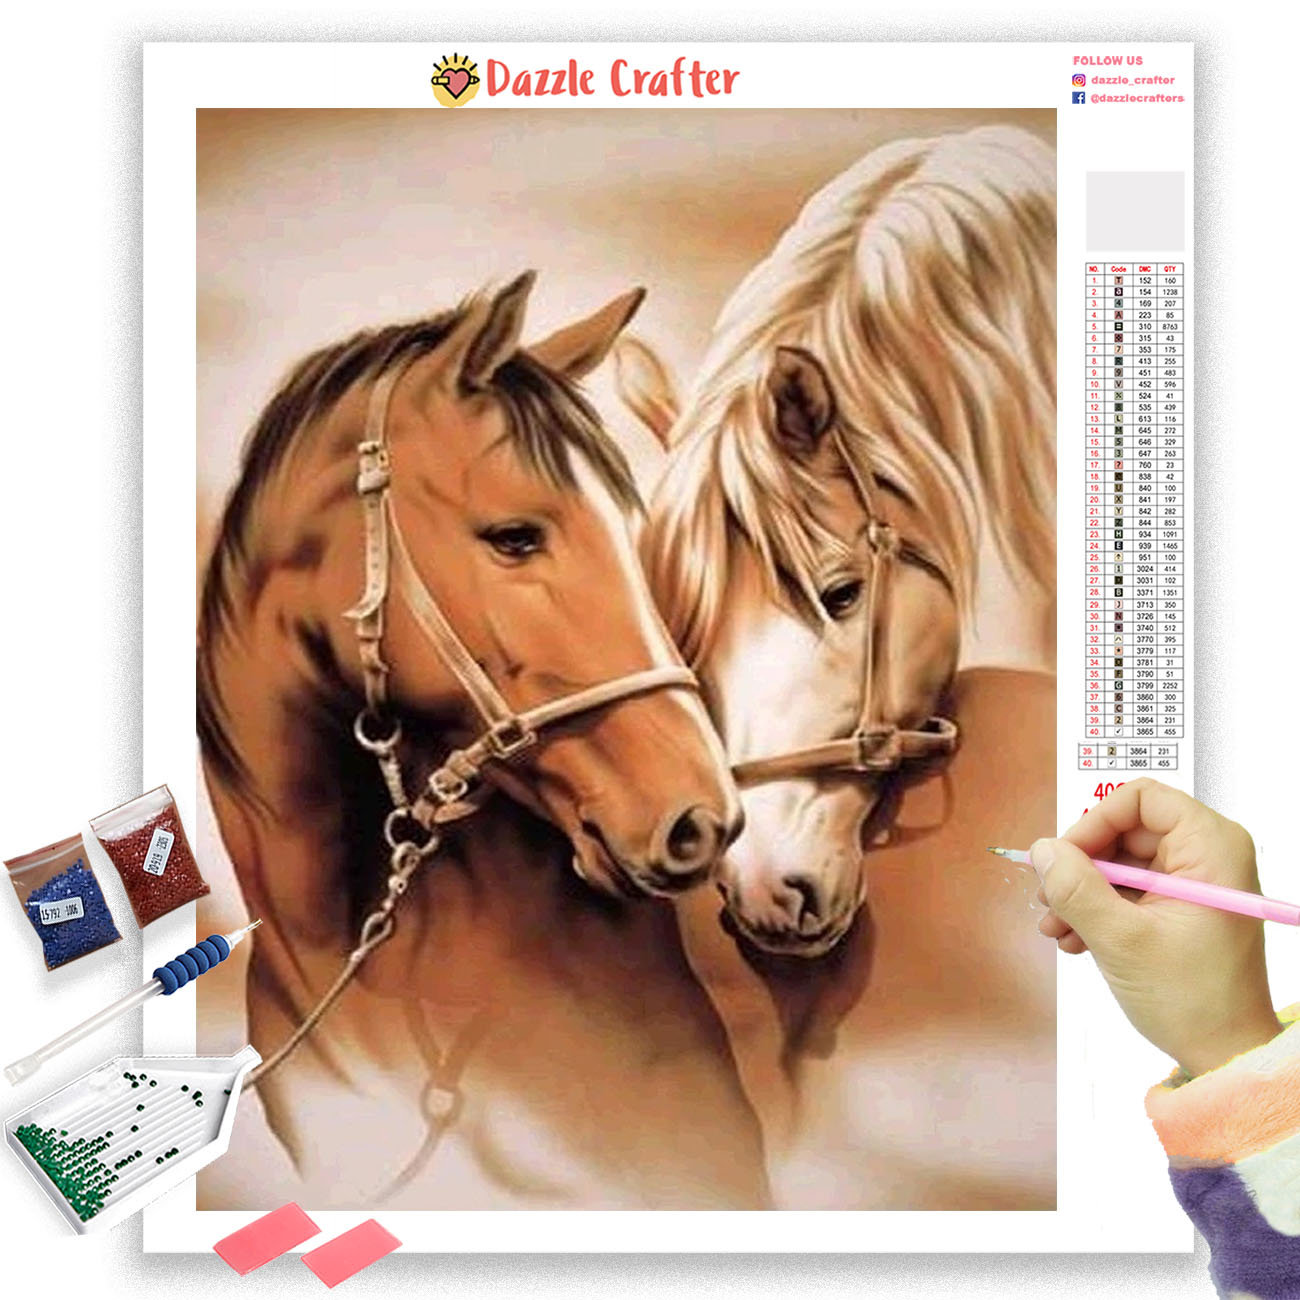 CHOSIGHT 5D Diamond Painting Horse Kit - DIY Paint with Diamond Art Indian  Round Full Drill Craft, Home Decor Embroidery Set with Canvas, Tools